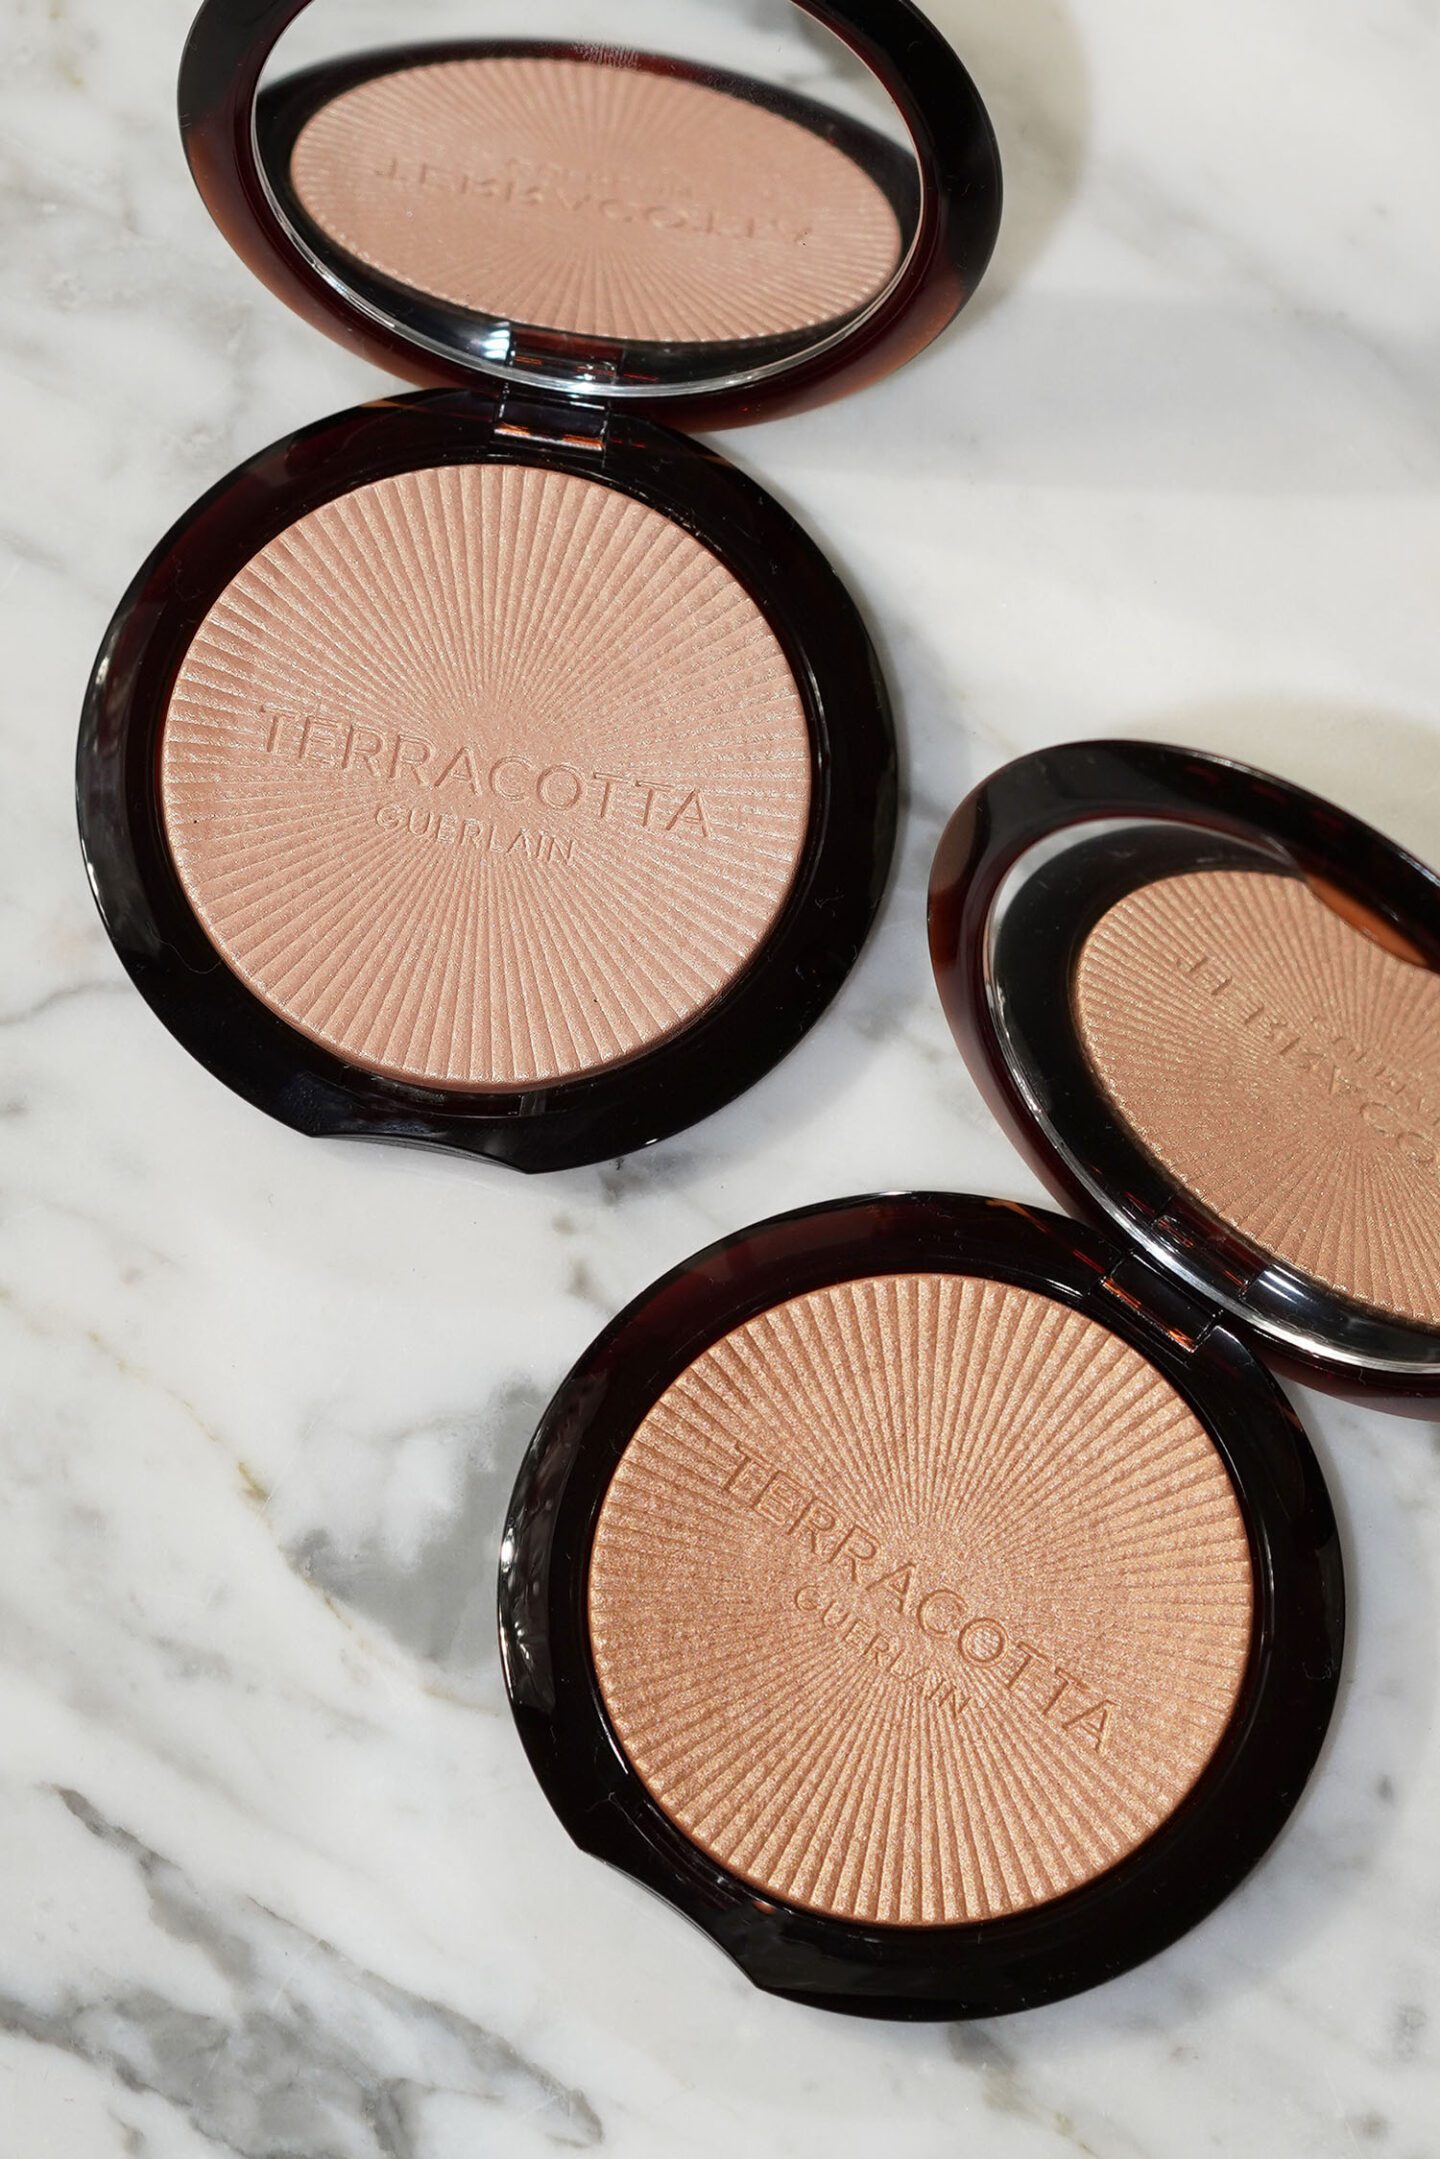 Guerlain Terracotta Luminizers Cool Ivory and Warm Gold